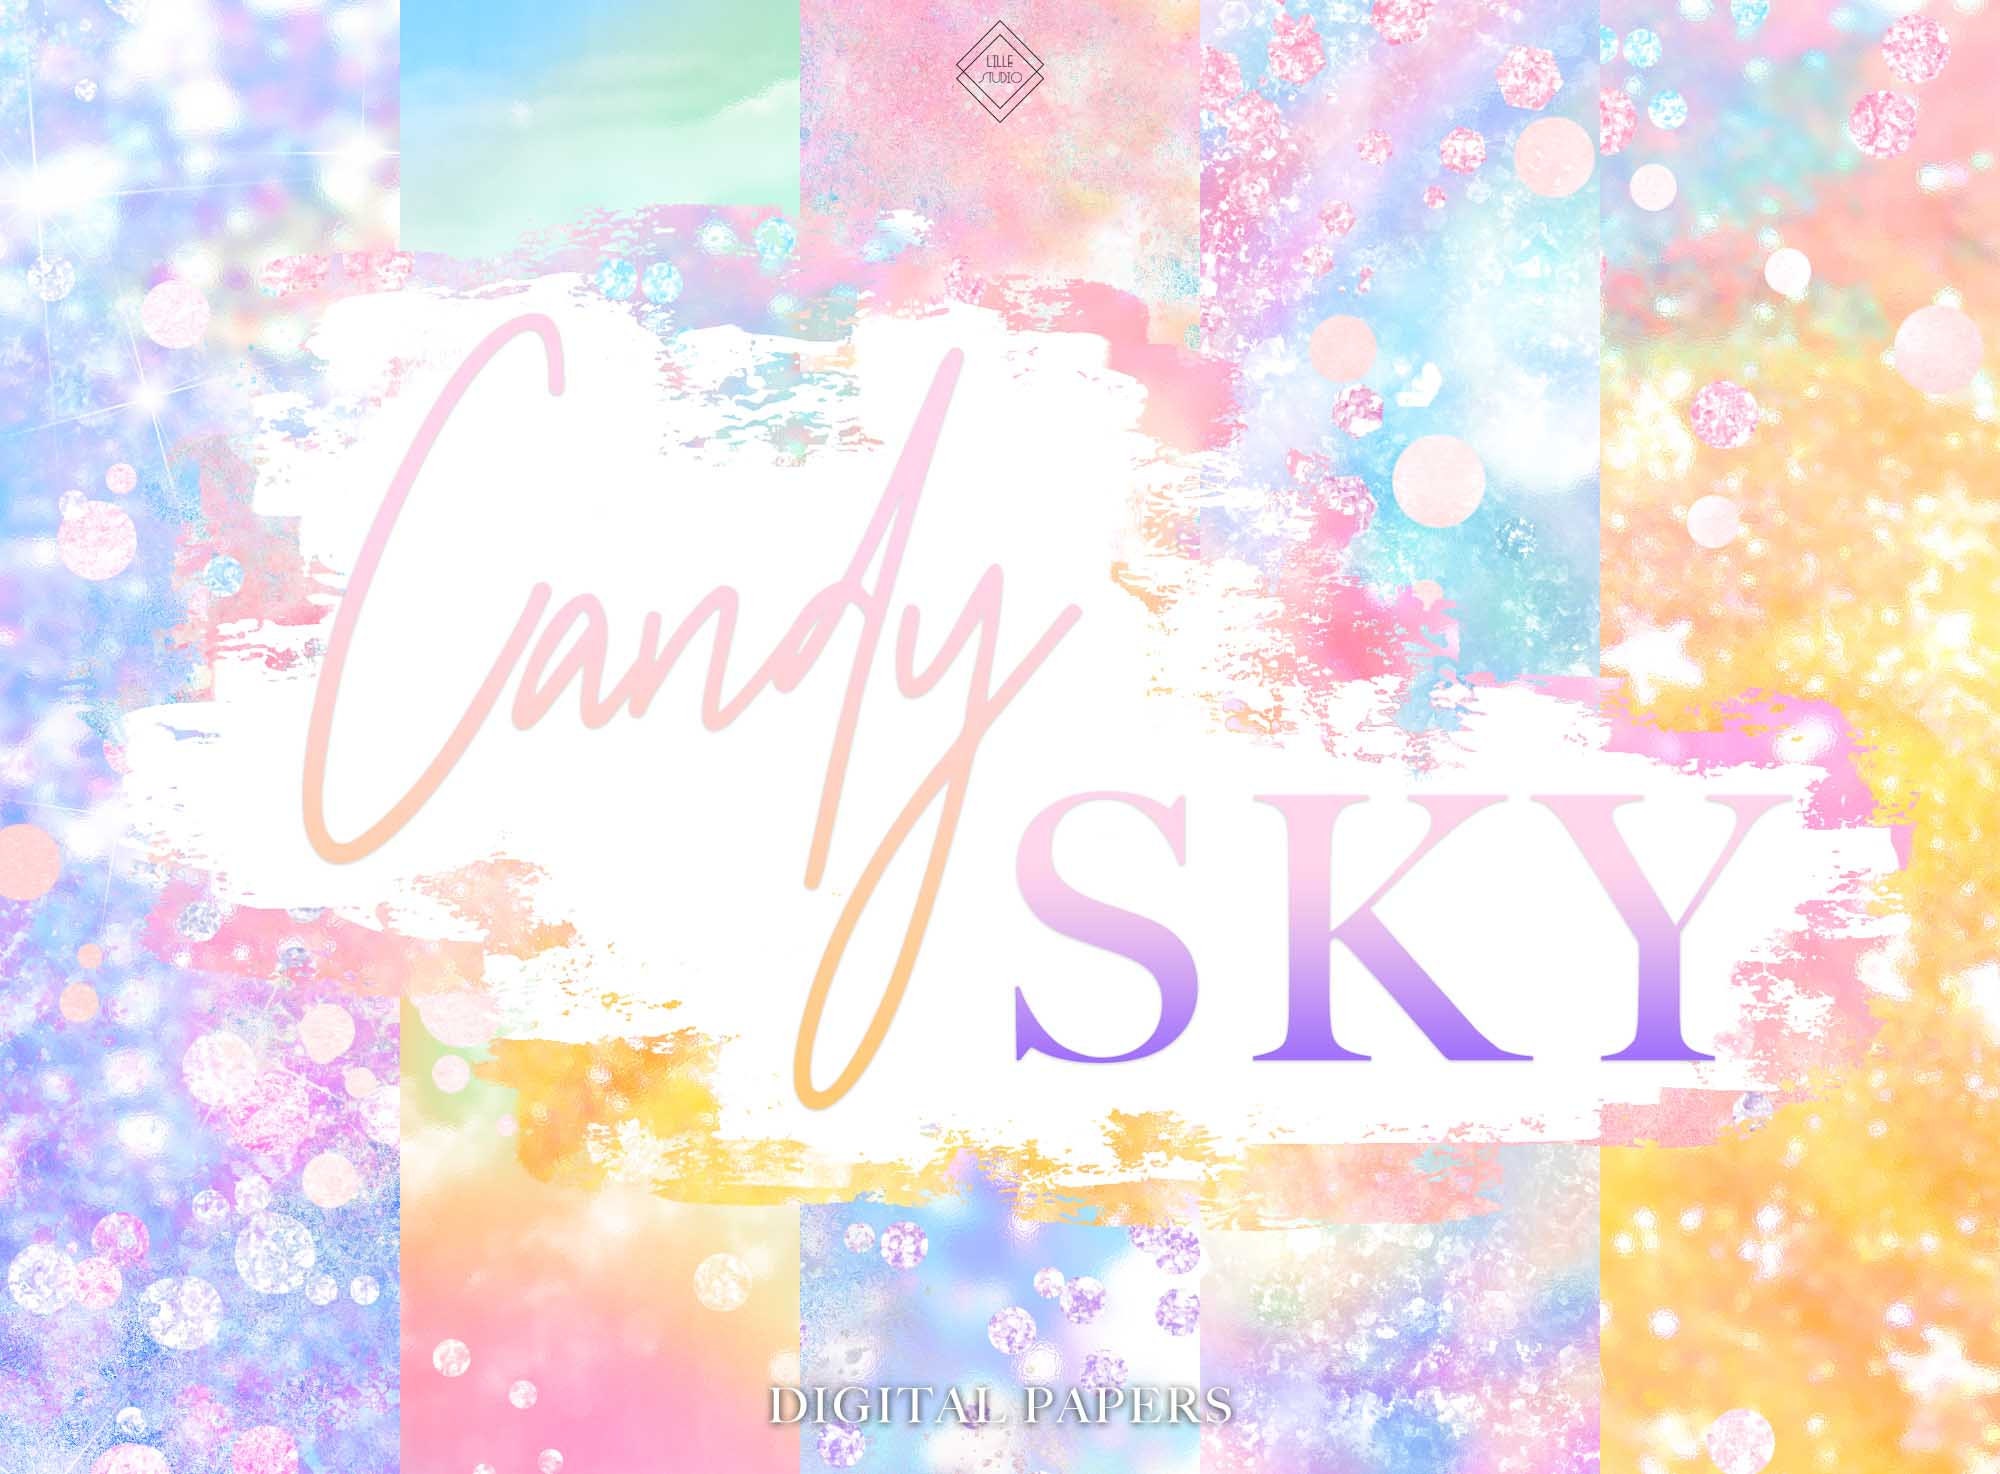 Pastel Stardust Galaxy Candy Unicorn Princess Fantasy Background Stock  Photo - Download Image Now - iStock